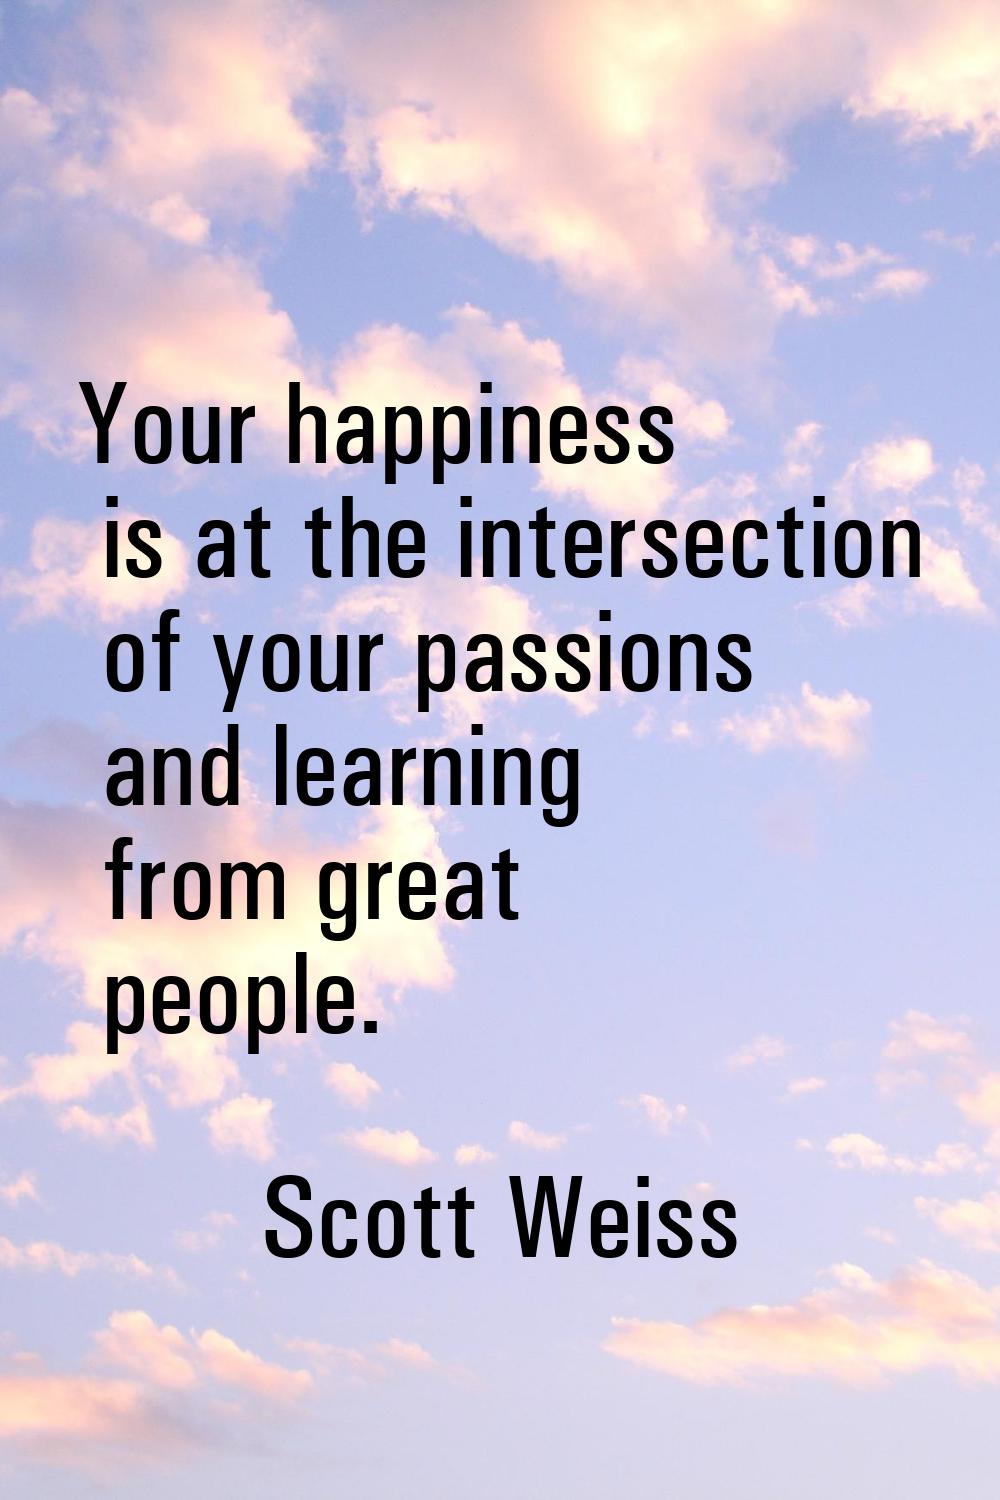 Your happiness is at the intersection of your passions and learning from great people.